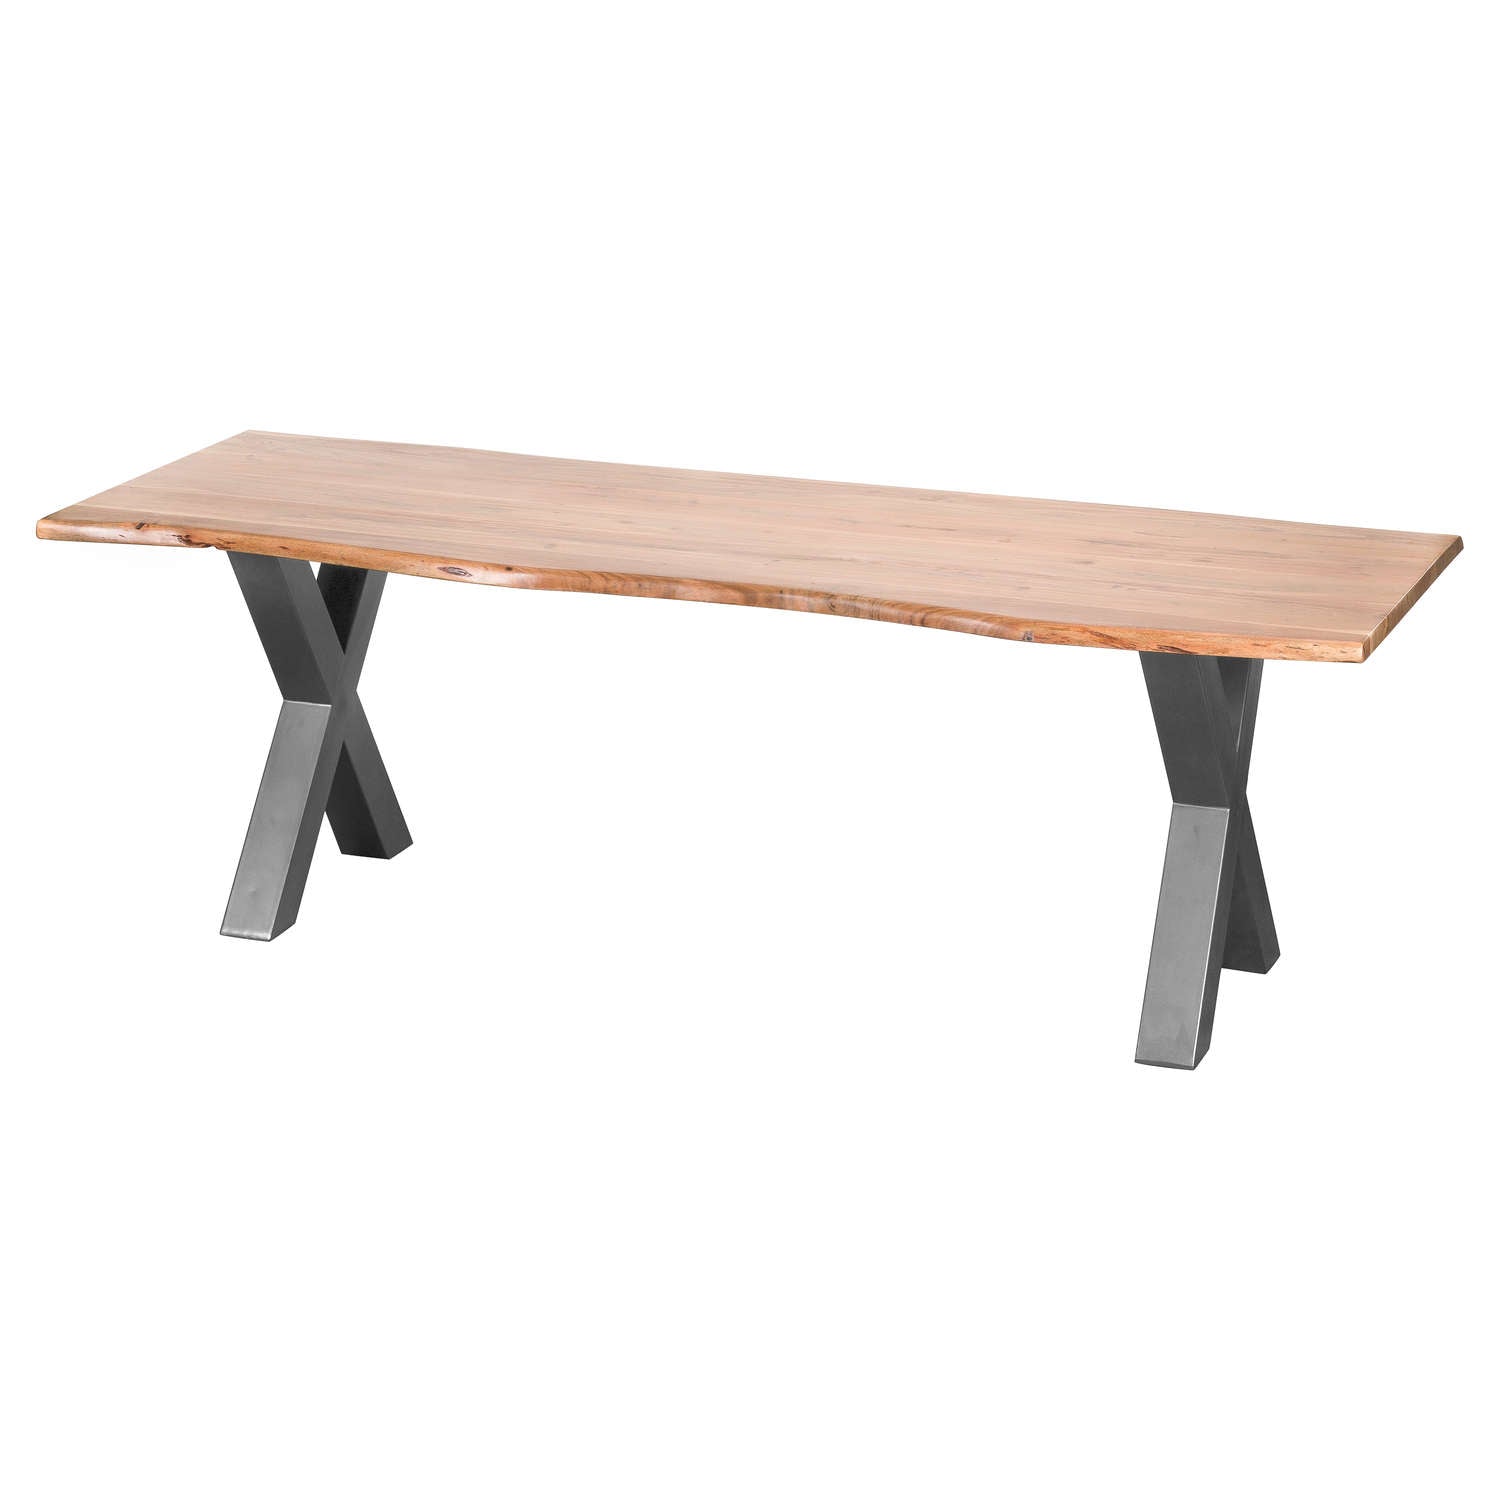 View Live Edge Large Dining Table information